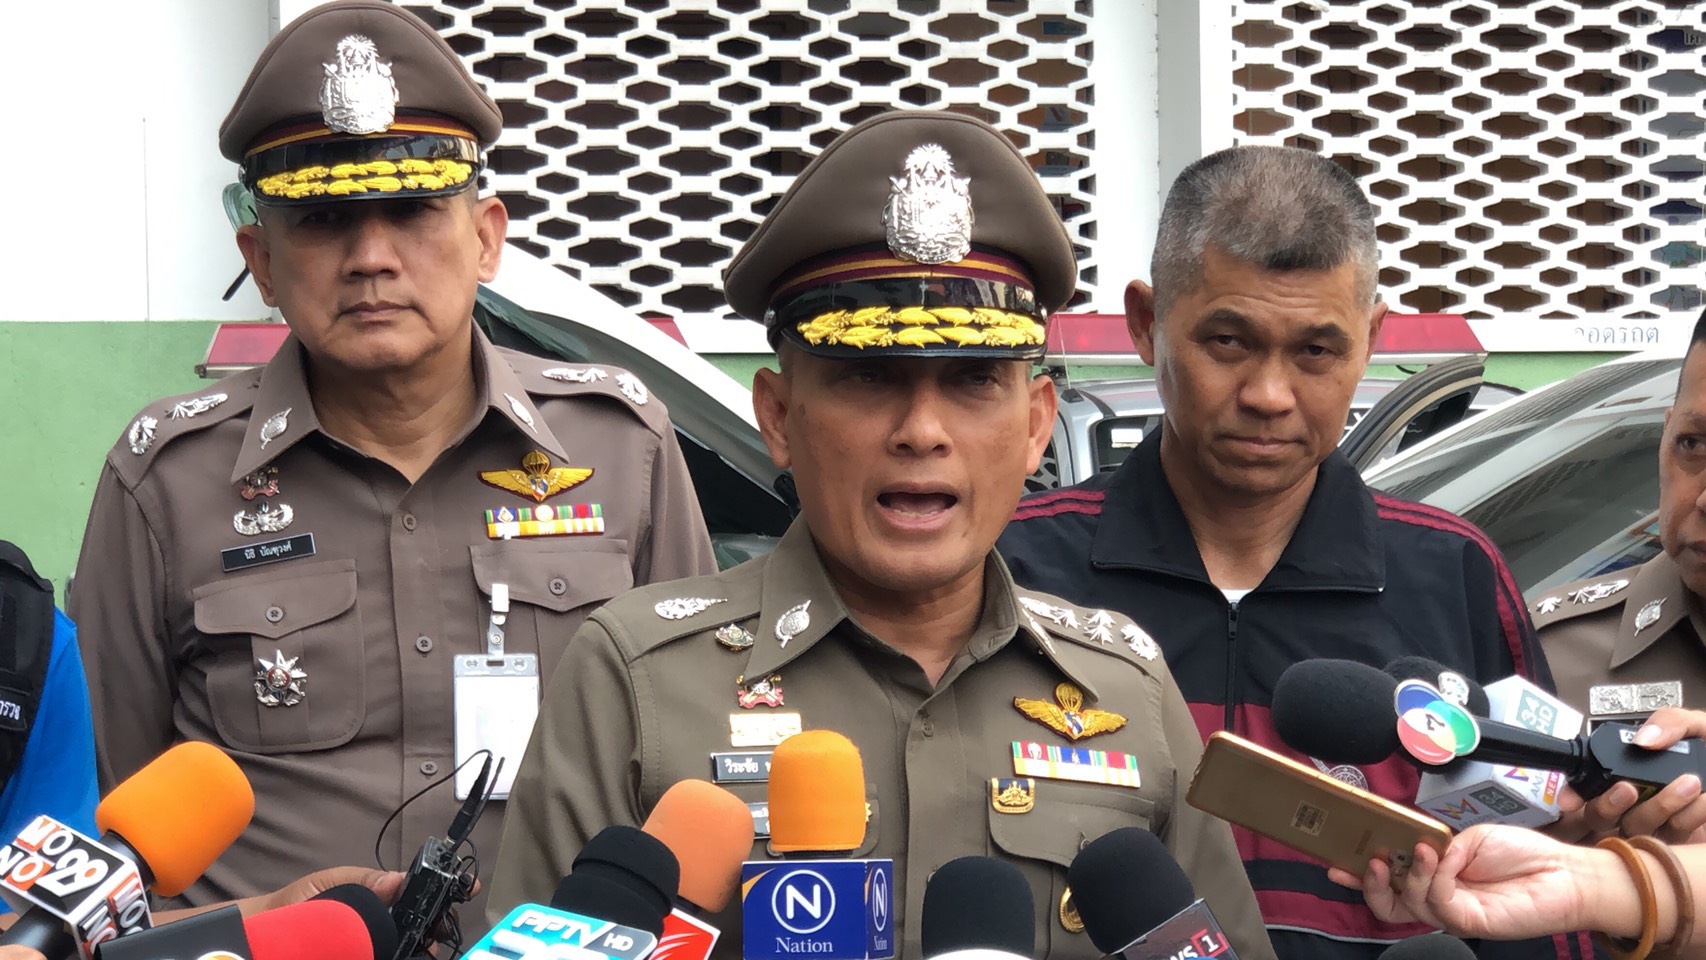 Deputy police chief Wirachai Songmetta speaks to the media after inspecting evidence from the shooting case on Jan. 9, 2020.